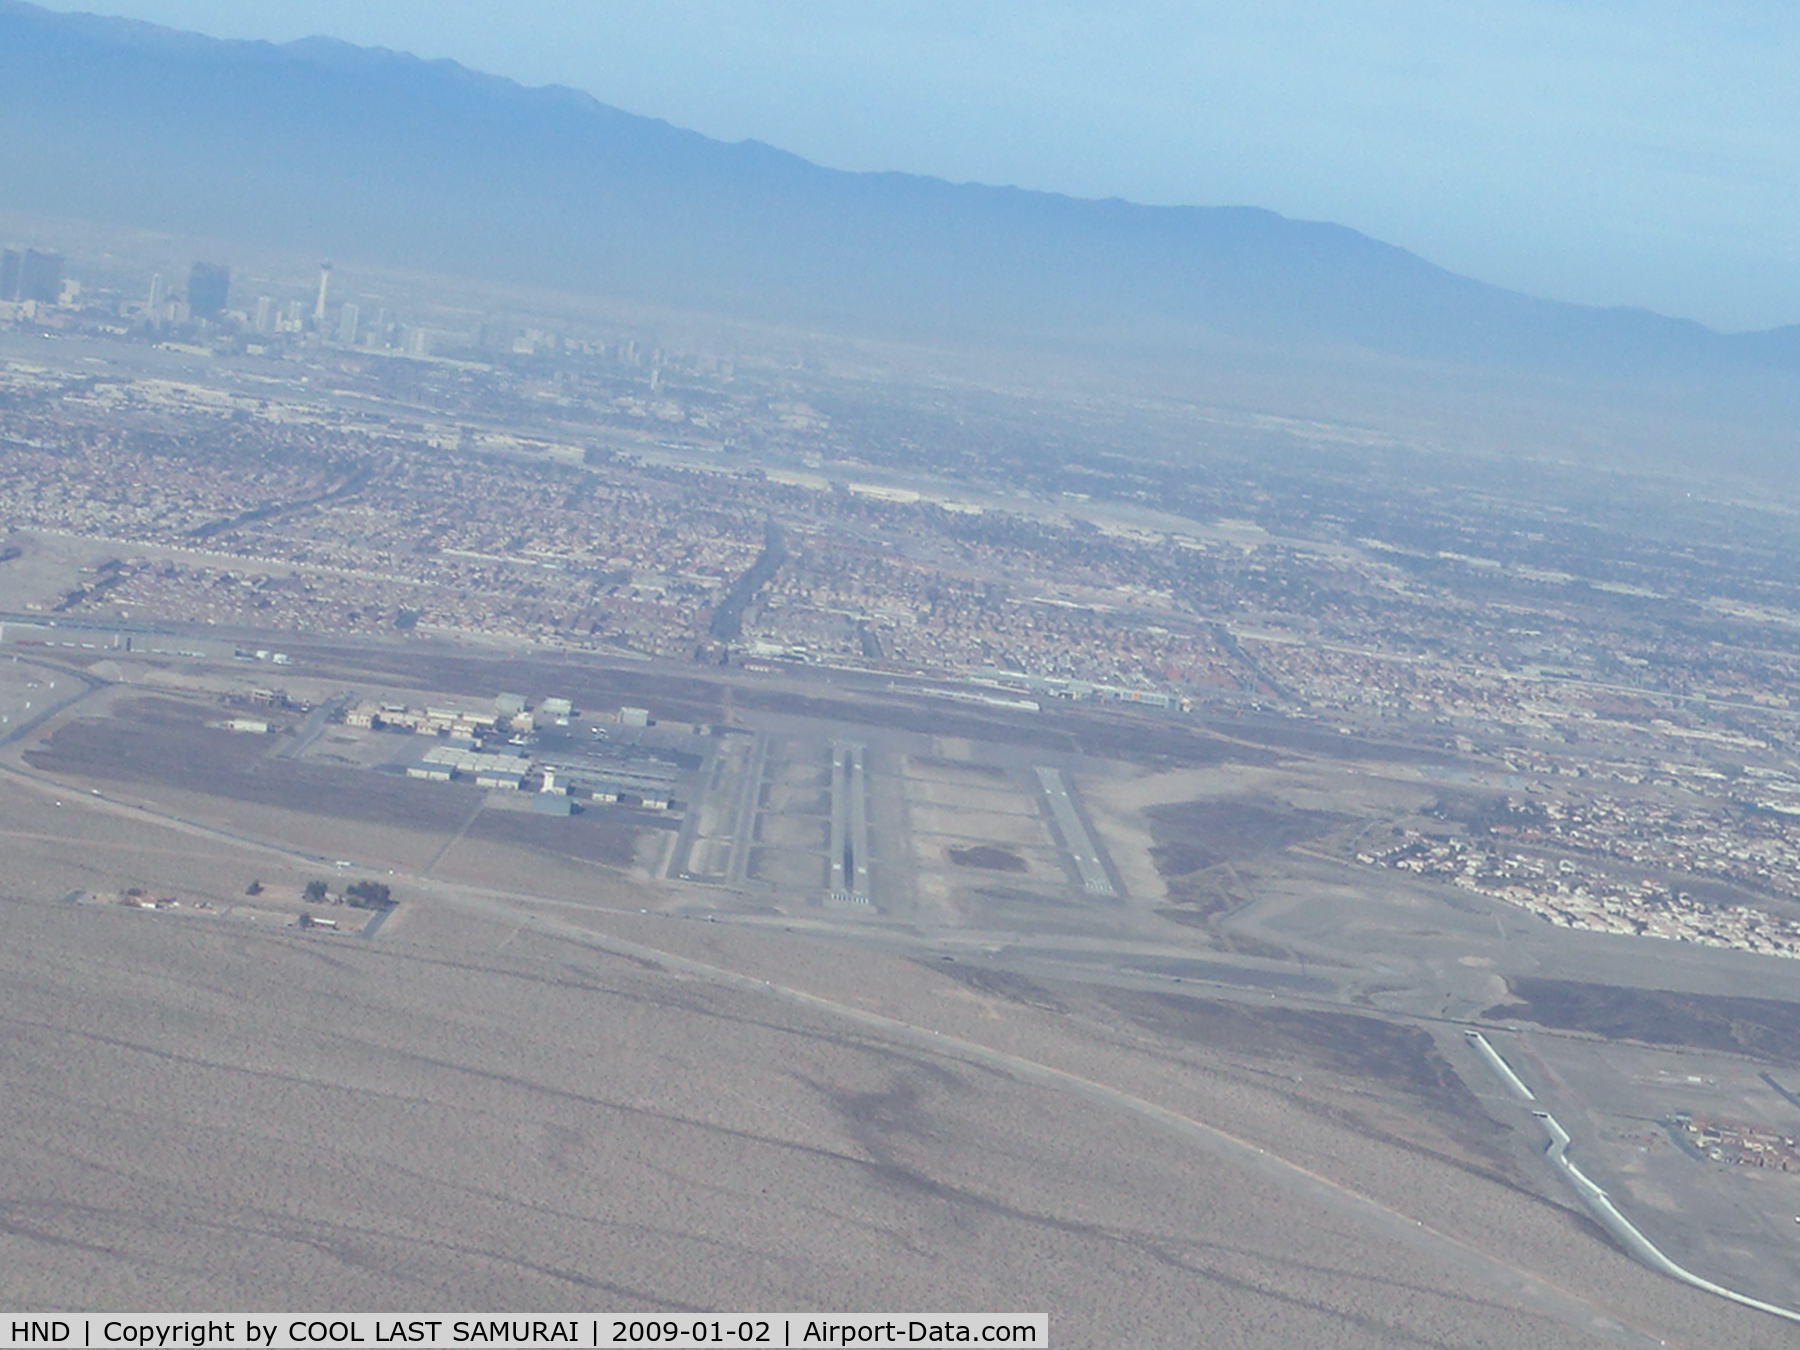 Henderson Executive Airport (HND) - HND Rwy35L 5mile on final. 